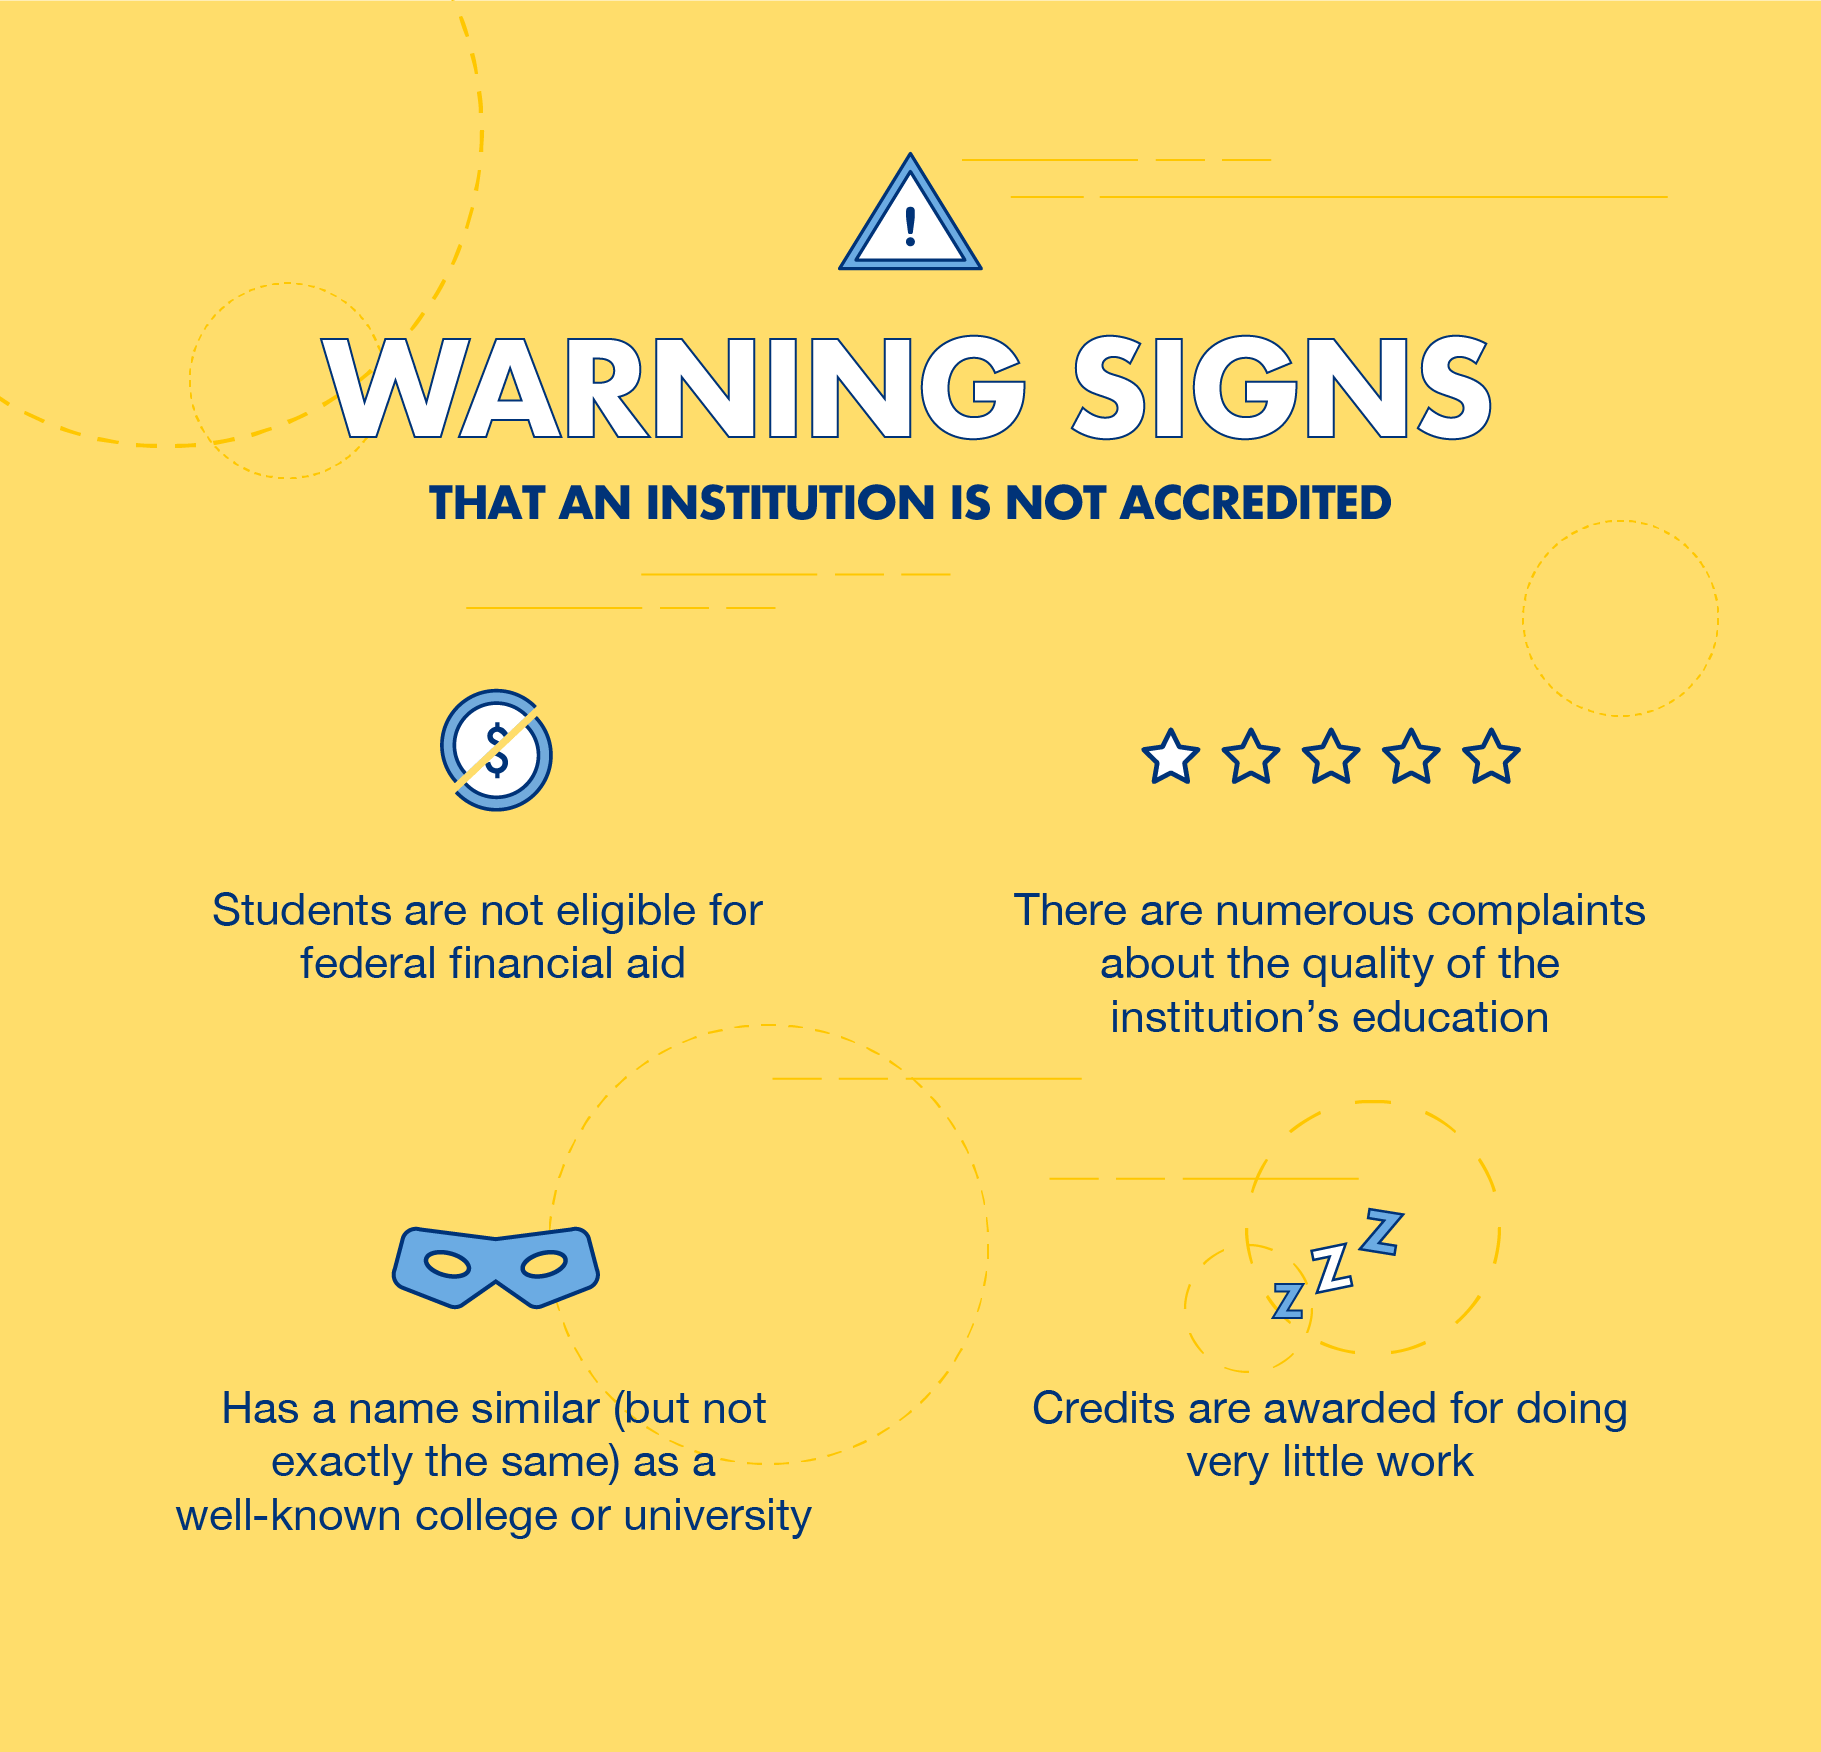 Warning signs that an institution is not accredited